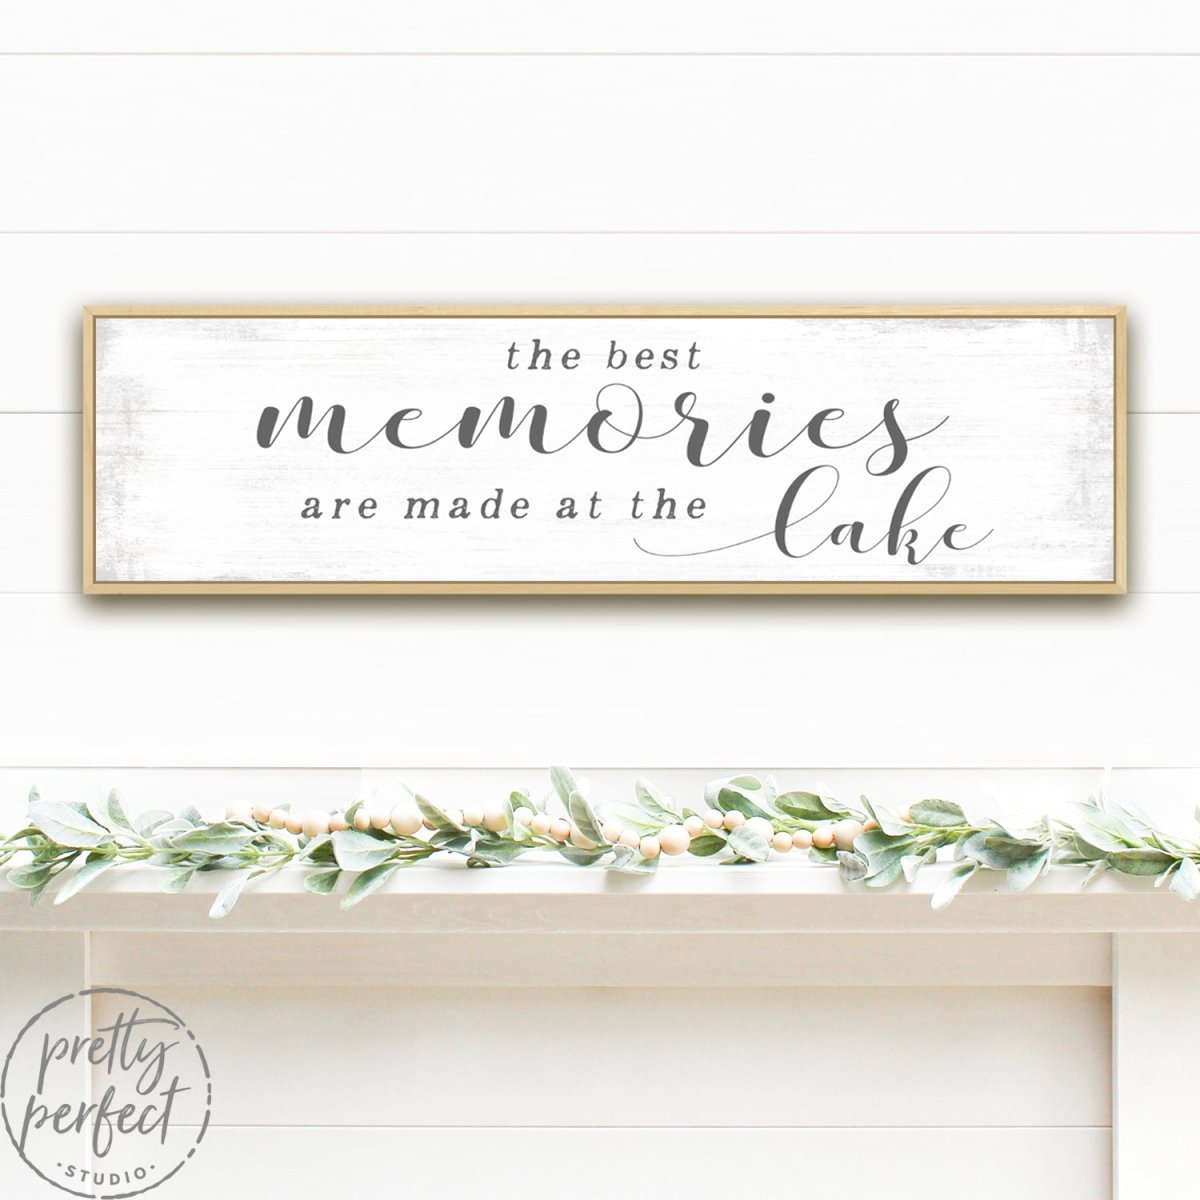 The Best Memories Are Made at the Lake Sign Above Entryway Shelf - Pretty Perfect Studio